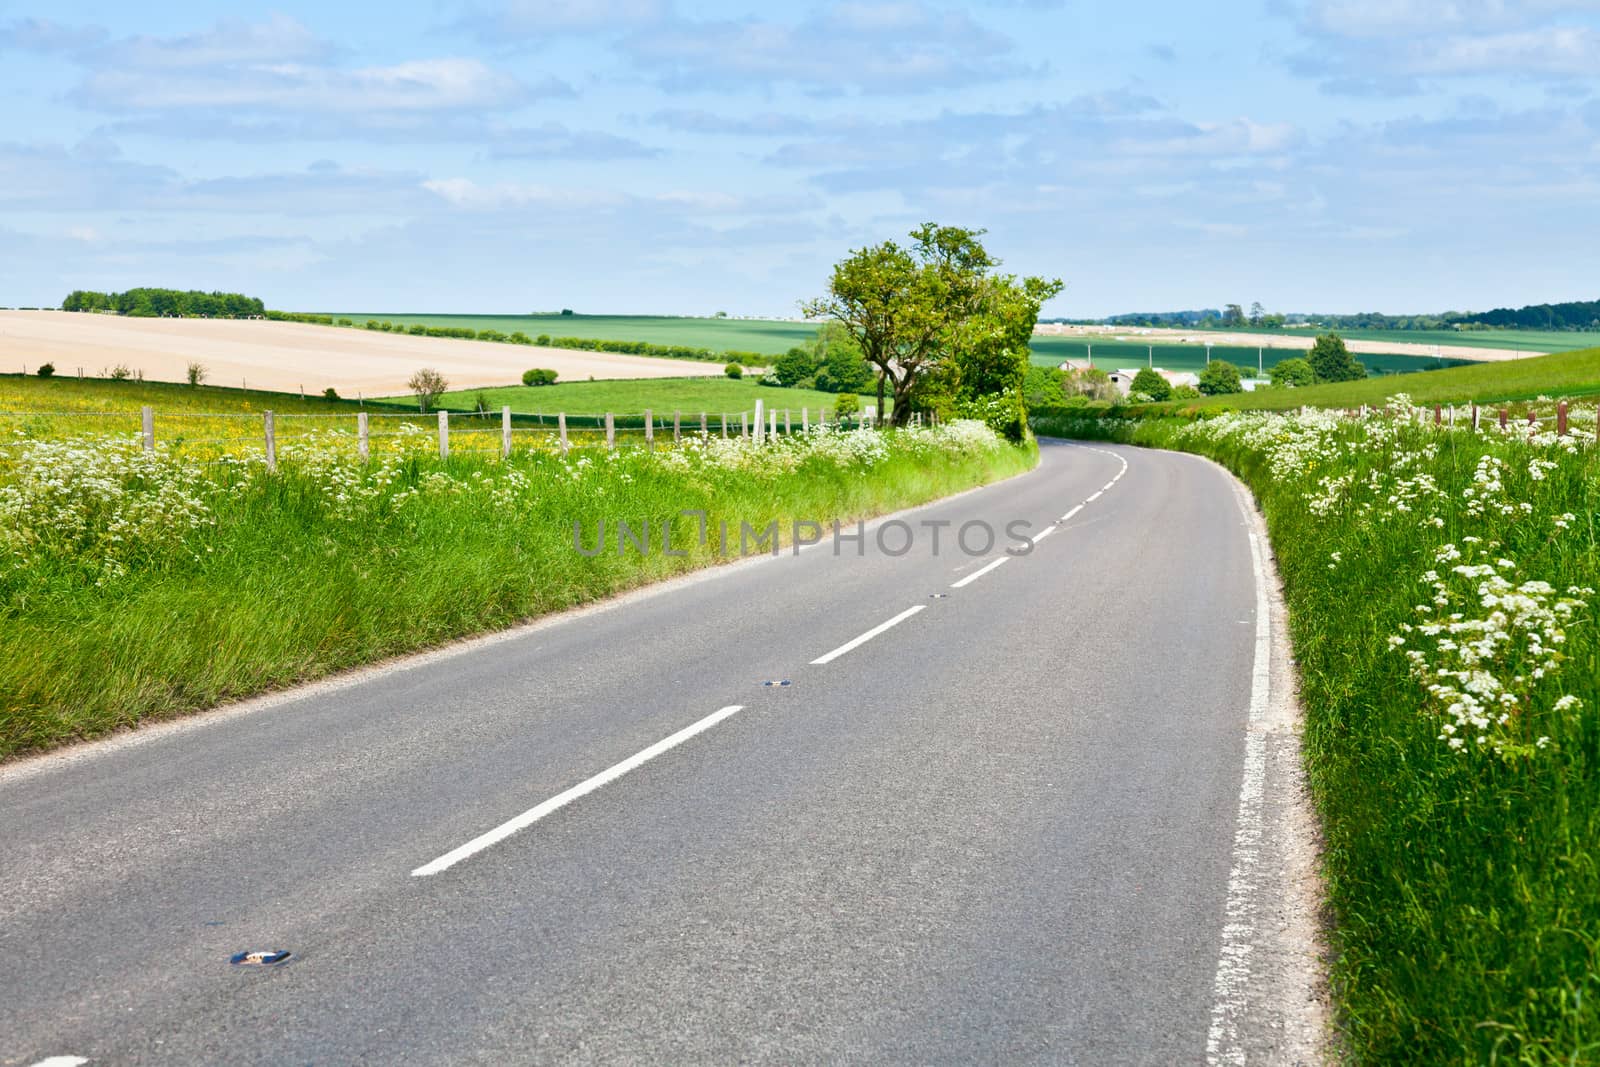 Road in England by naumoid